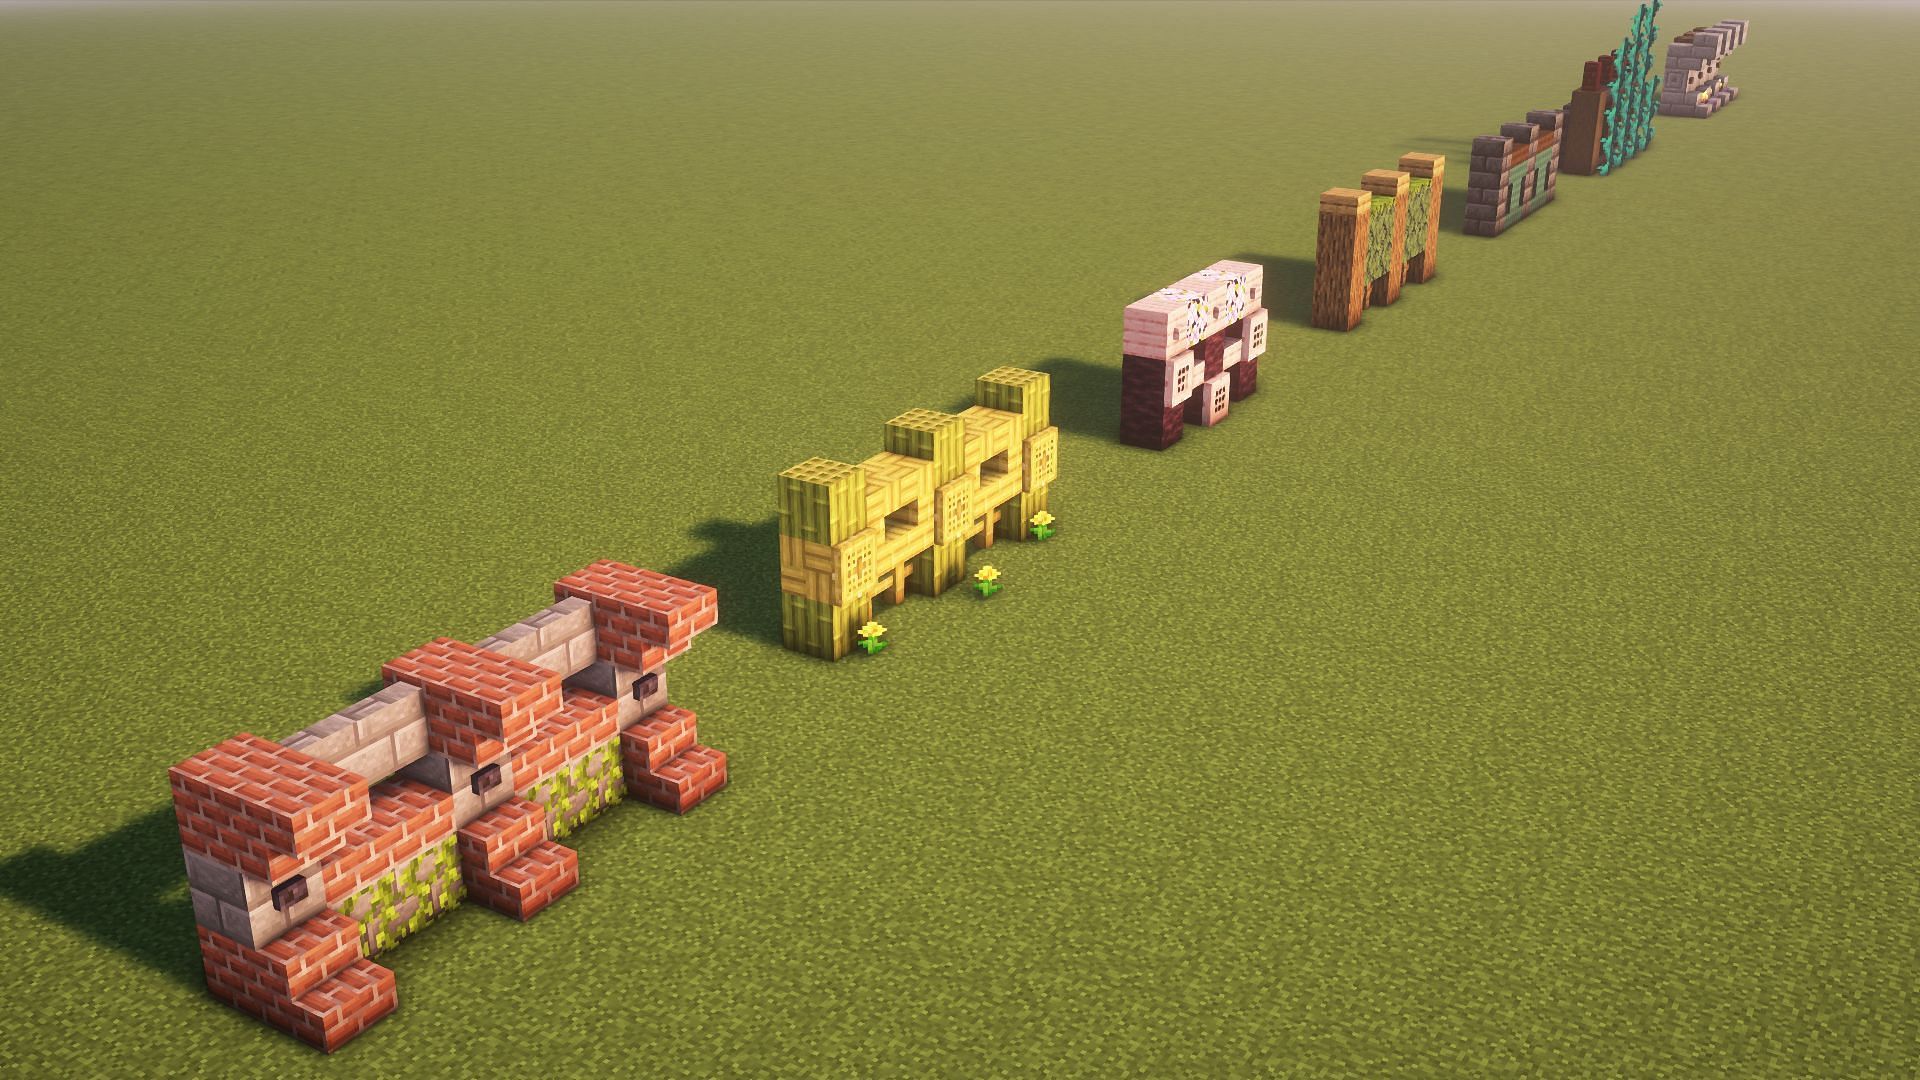 There are many kinds of walls that players can create in Minecraft (Image via Mojang)